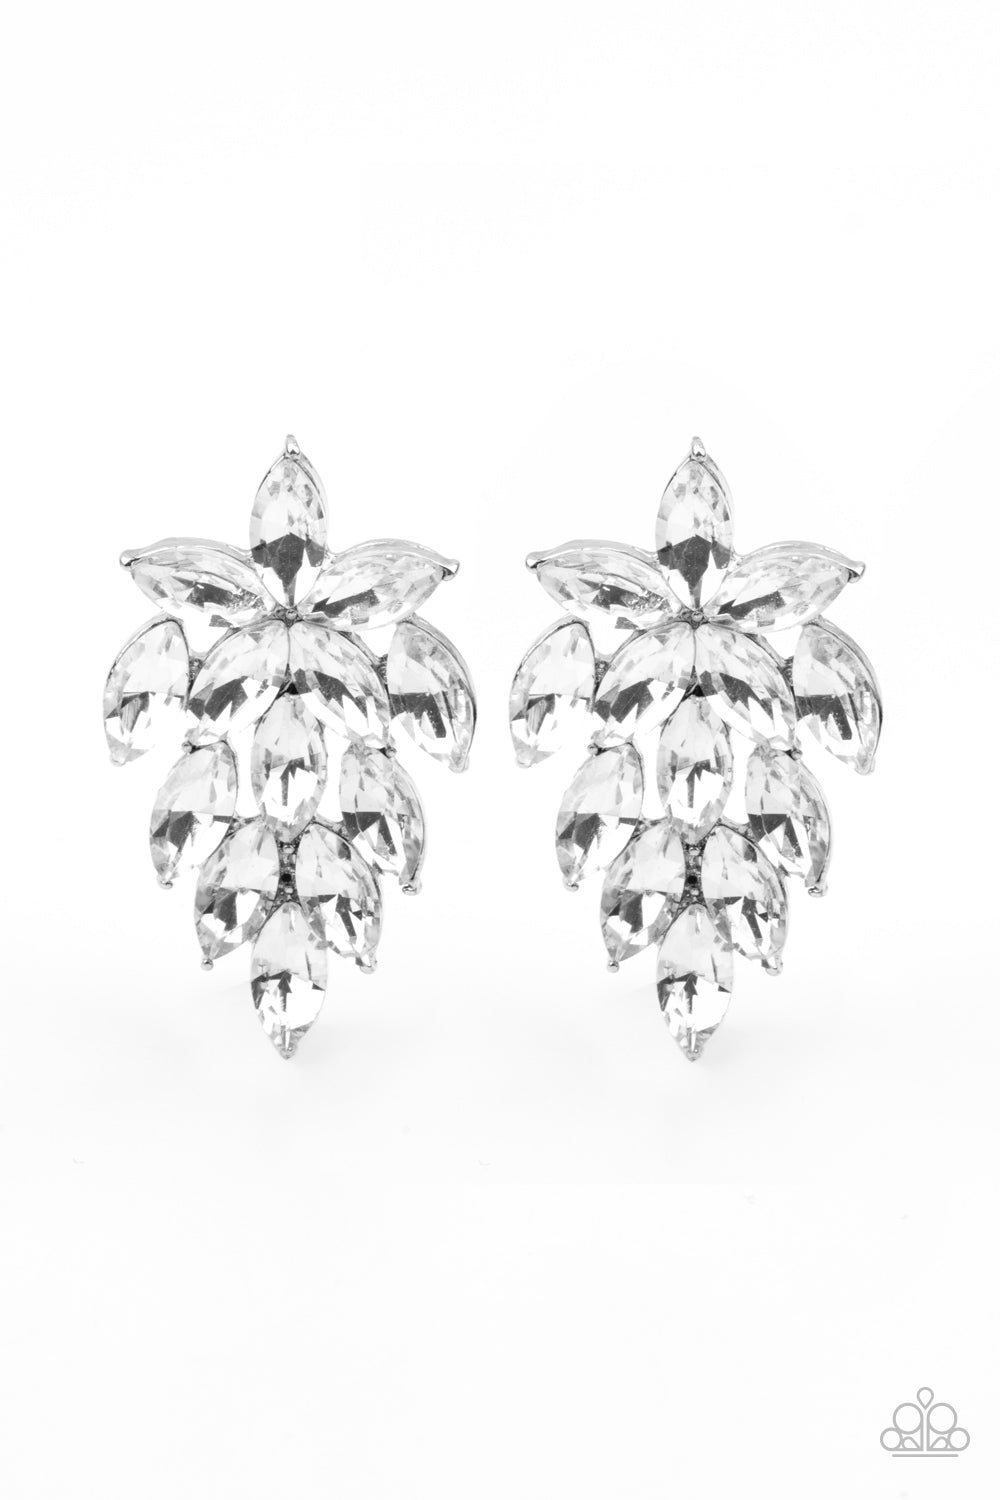 Featuring dainty silver studded accents, a sparkly collection of marquise cut white rhinestones flare out from the bottom of floral arranged rhinestones for a flauntable finish. Earring attaches to a standard post fitting.